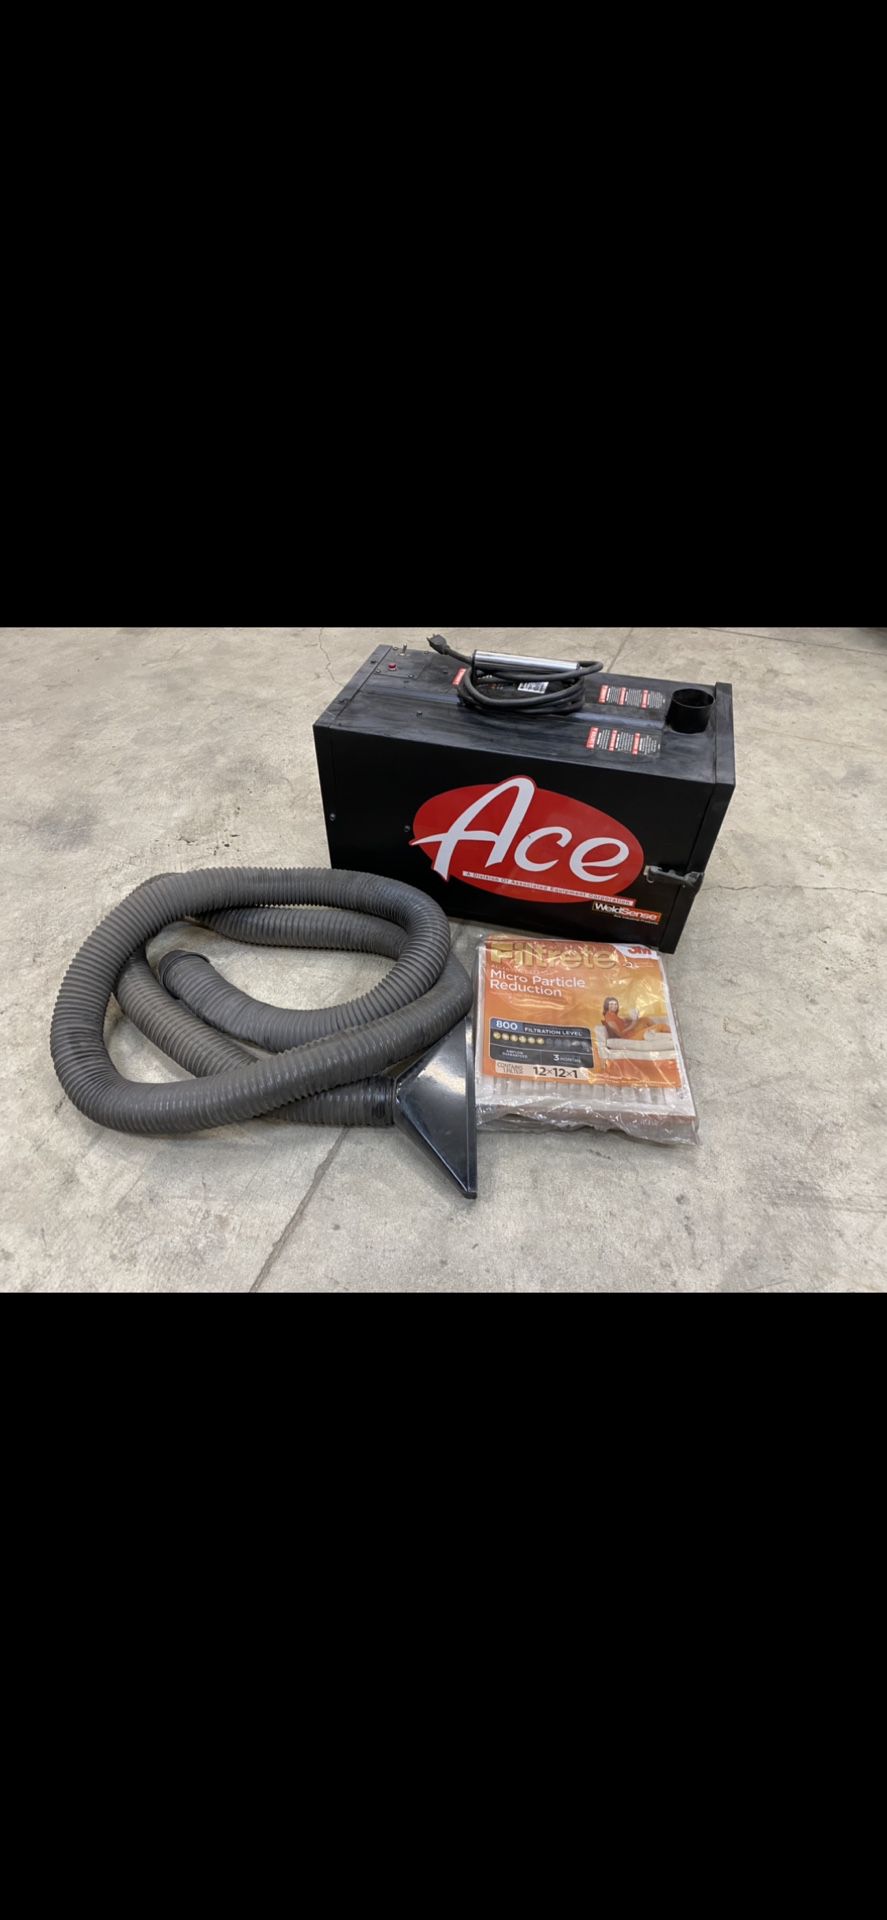 Ace Fume Extractor 73-200